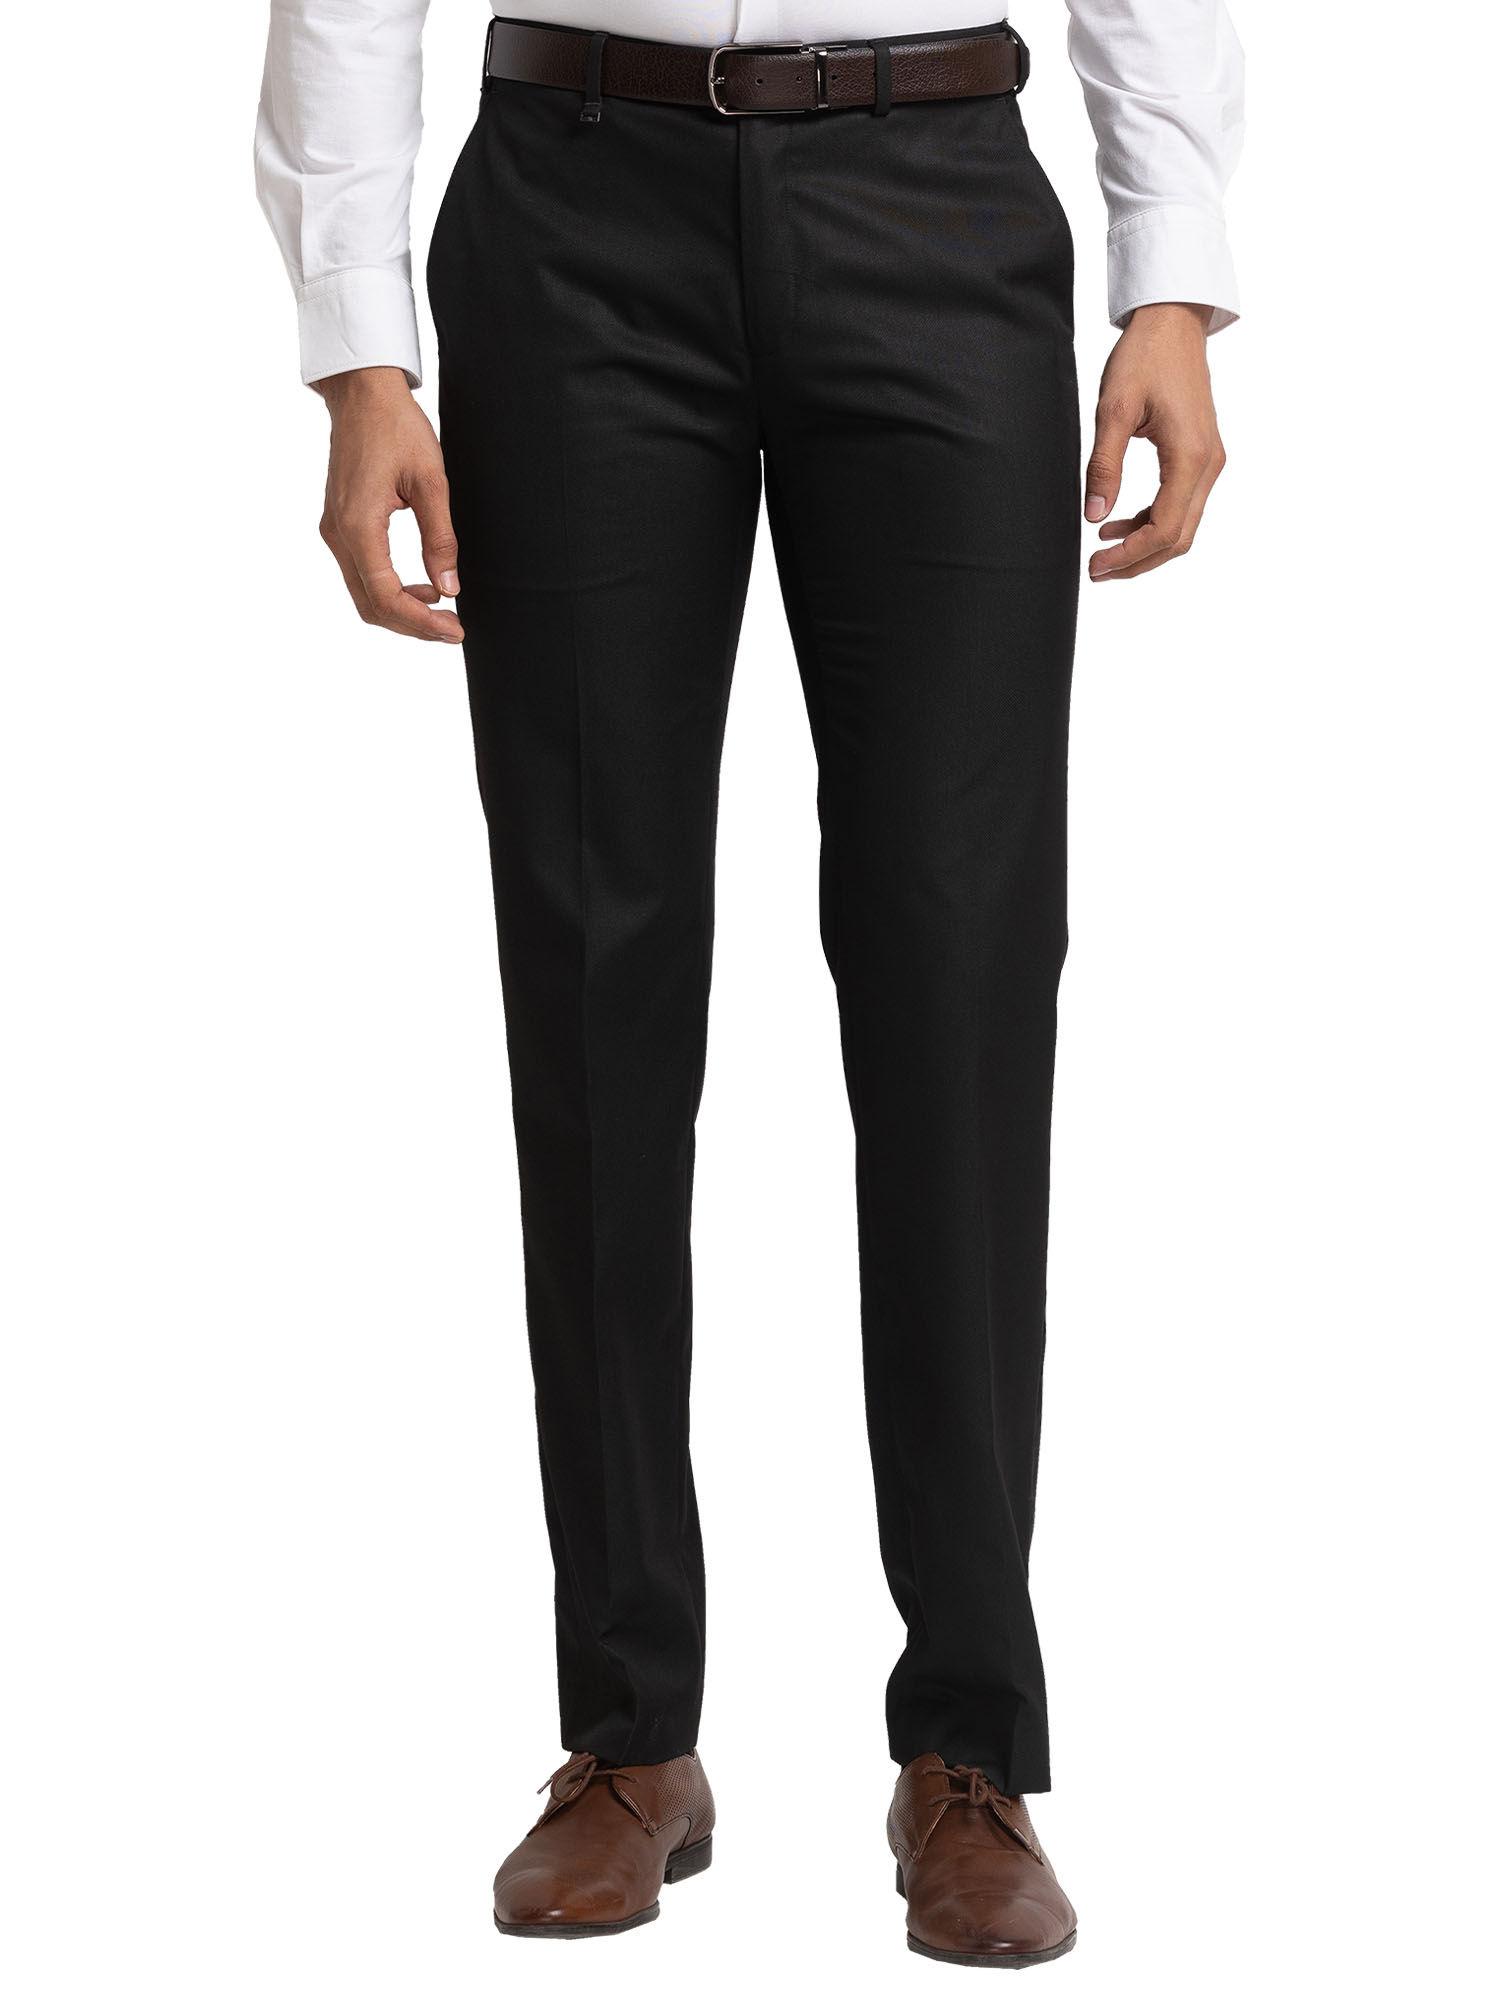 comfortable fit solid black trouser